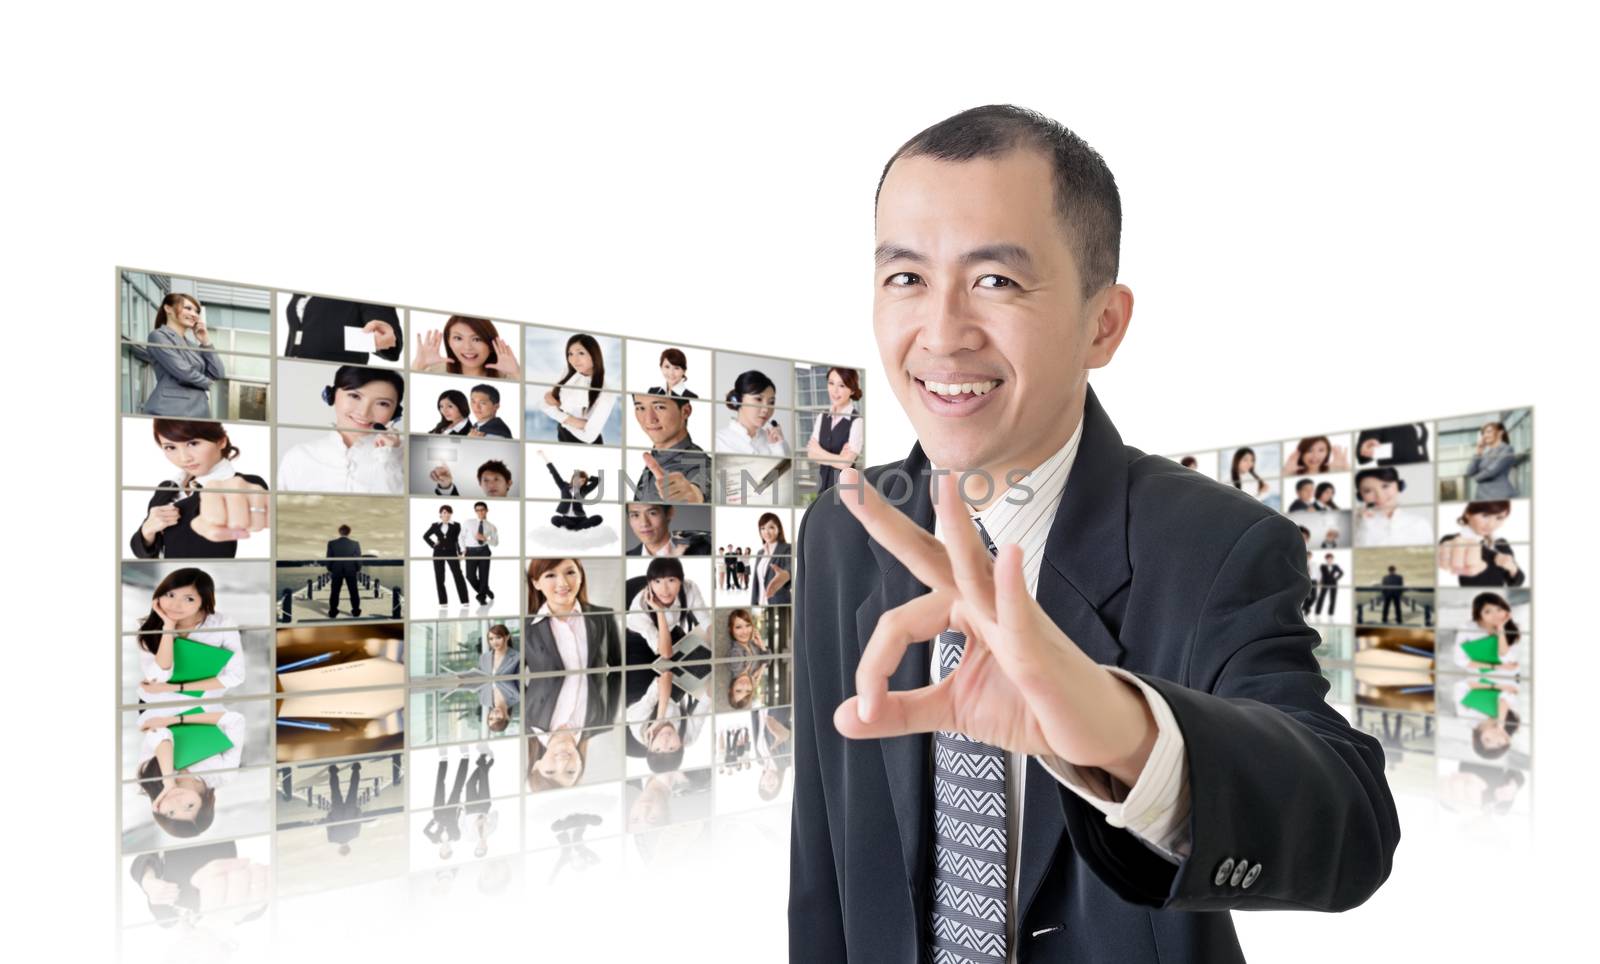 Asian business man or boss standing in front of tV screen wall showing pictures of business concept.